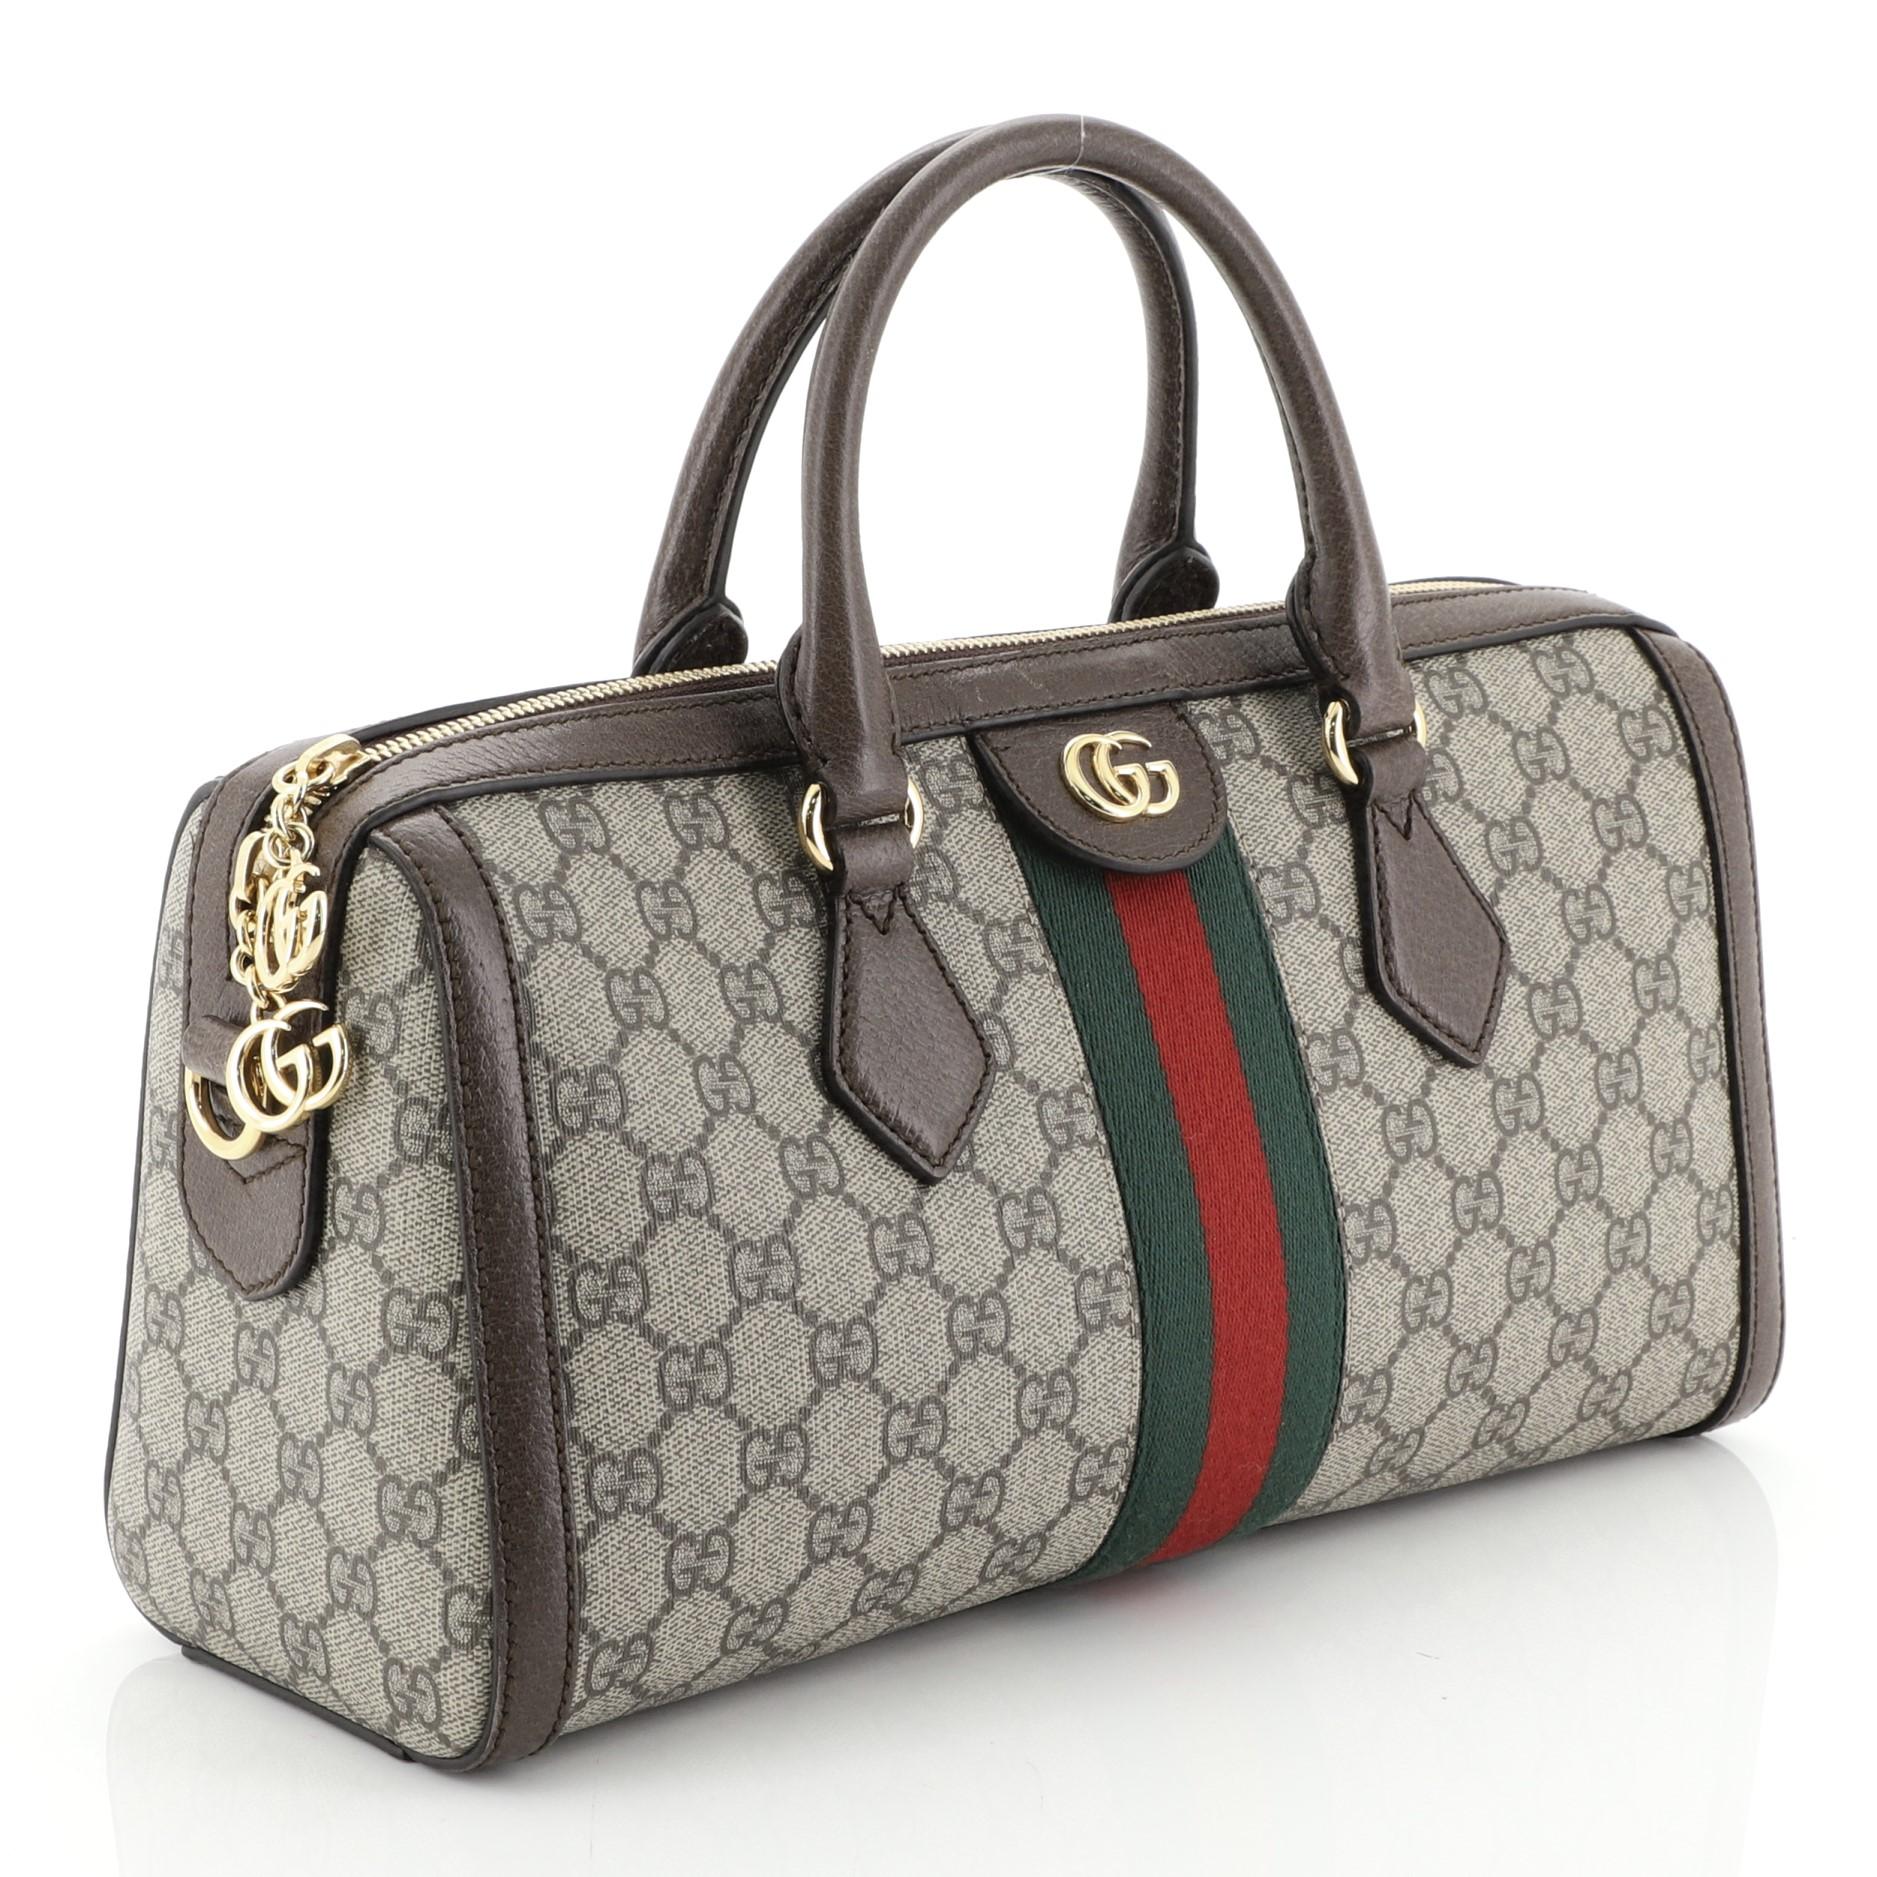 This Gucci Ophidia Boston Bag GG Coated Canvas Medium, crafted in brown GG coated canvas, features dual rolled leather handles, leather trim, web stripe detail, and gold-tone hardware. Its zip closure opens to a neutral microfiber interior.